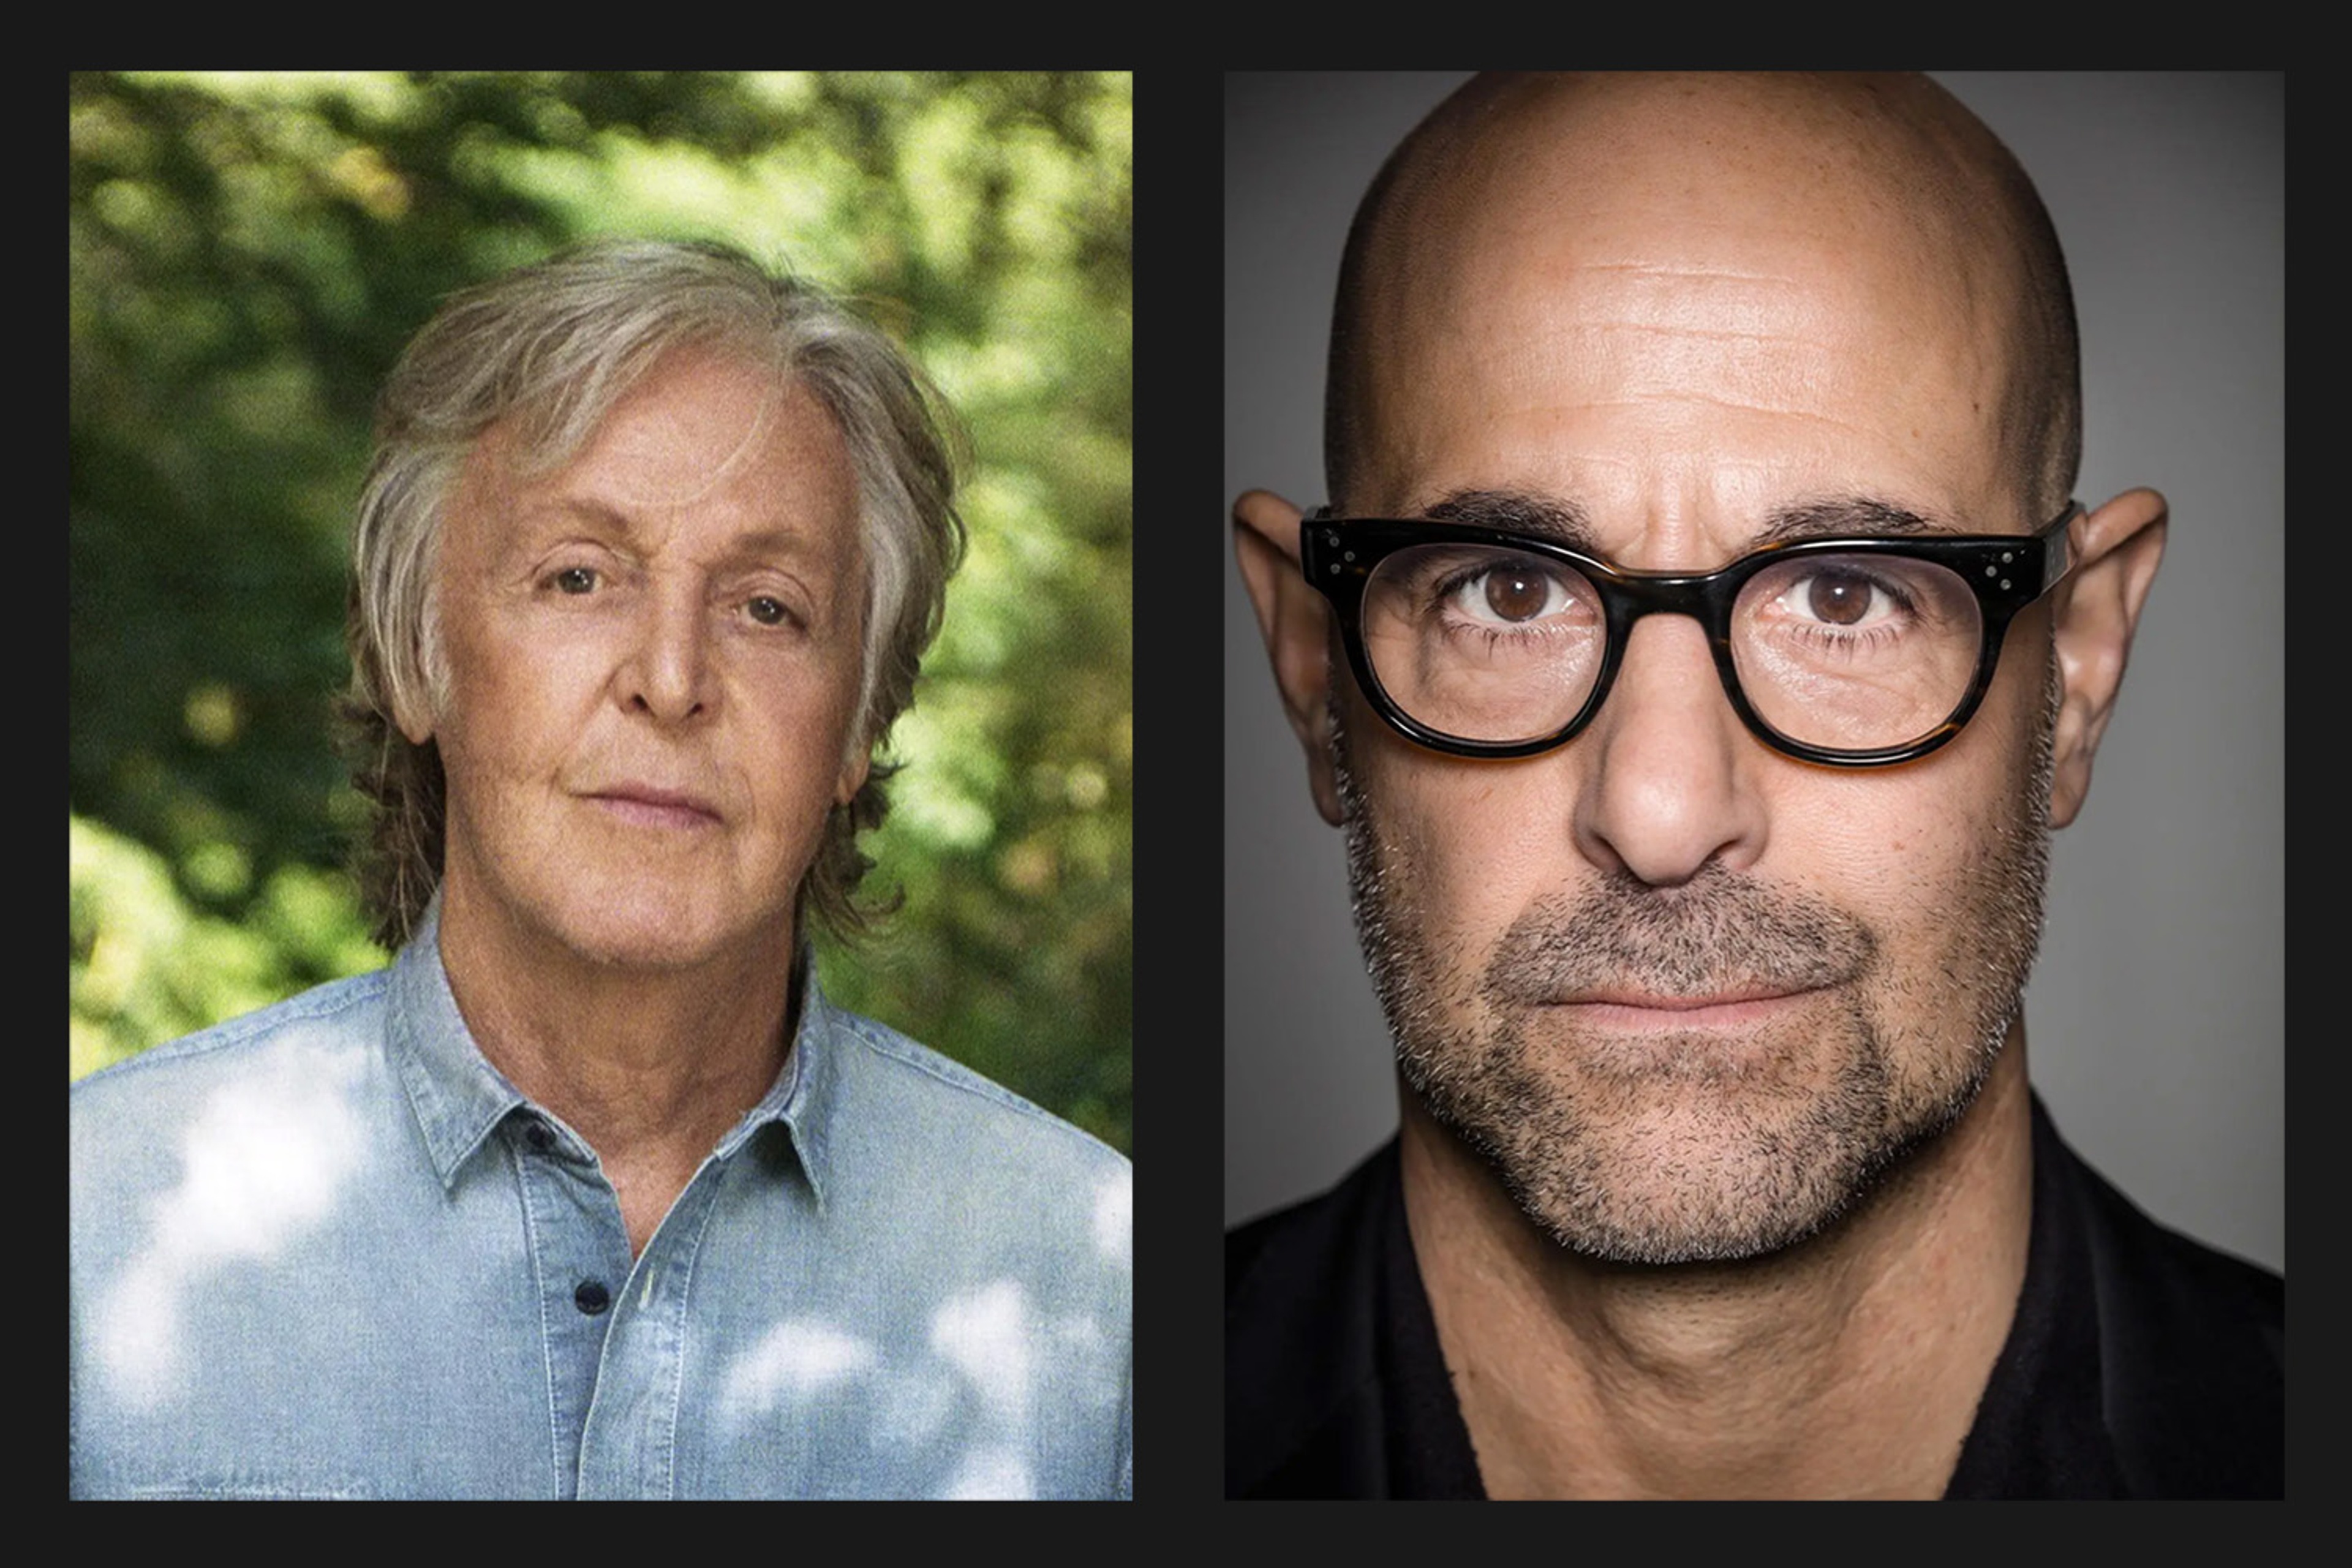 Composite image of Paul McCartney on the left and Stanley Tucci on the right. Photos by  Mary McCartney and Gerhard Jassner.